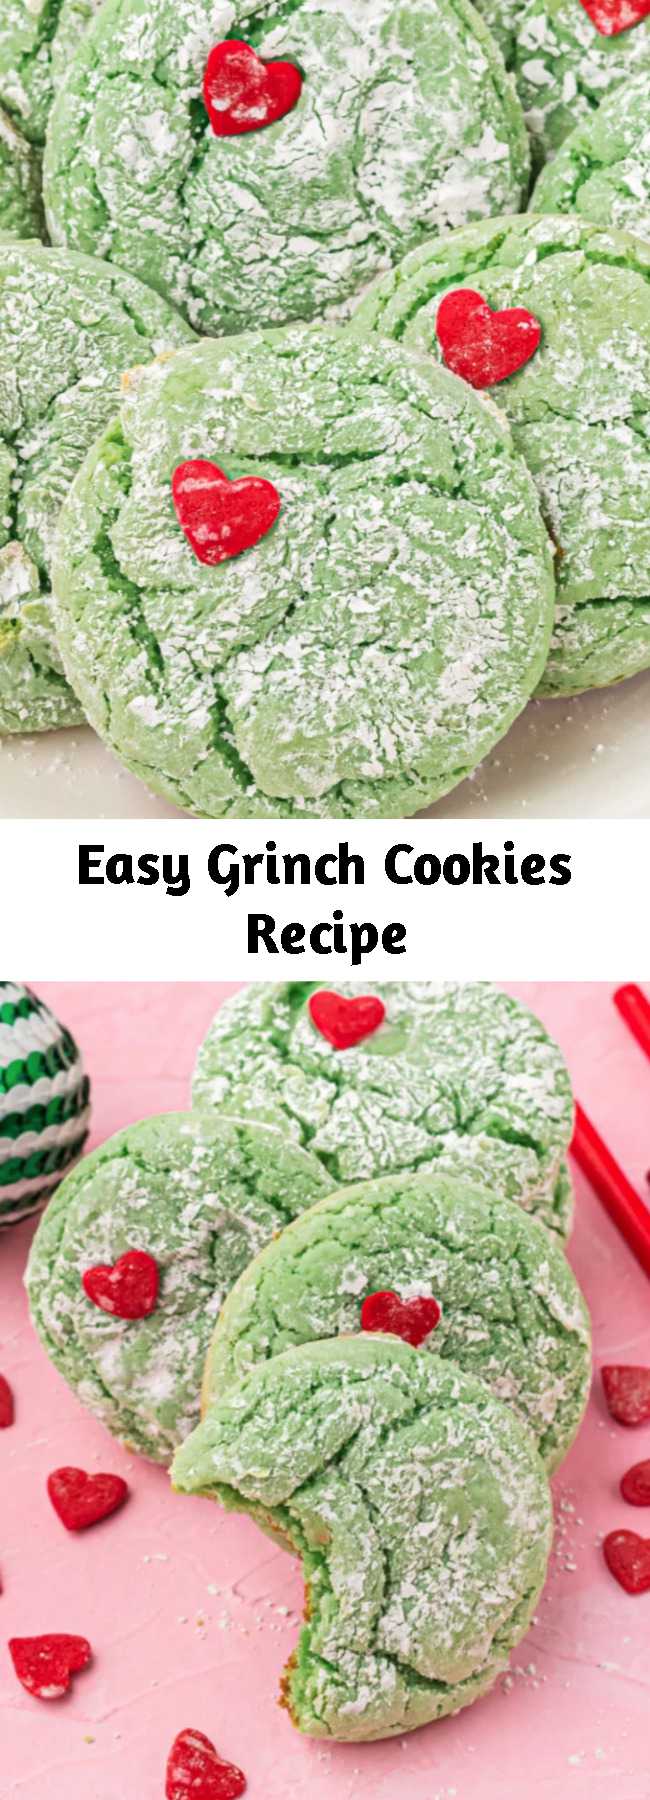 Easy Grinch Cookies Recipe - These Grinch Cookies are the ultimate holiday cookie. They have a soft, gooey texture, are colored to the perfect shade of Grinch-green and topped with powdered sugar and a tiny red heart sprinkle. They are so perfect, you'll never need another Christmas cookie recipe again!